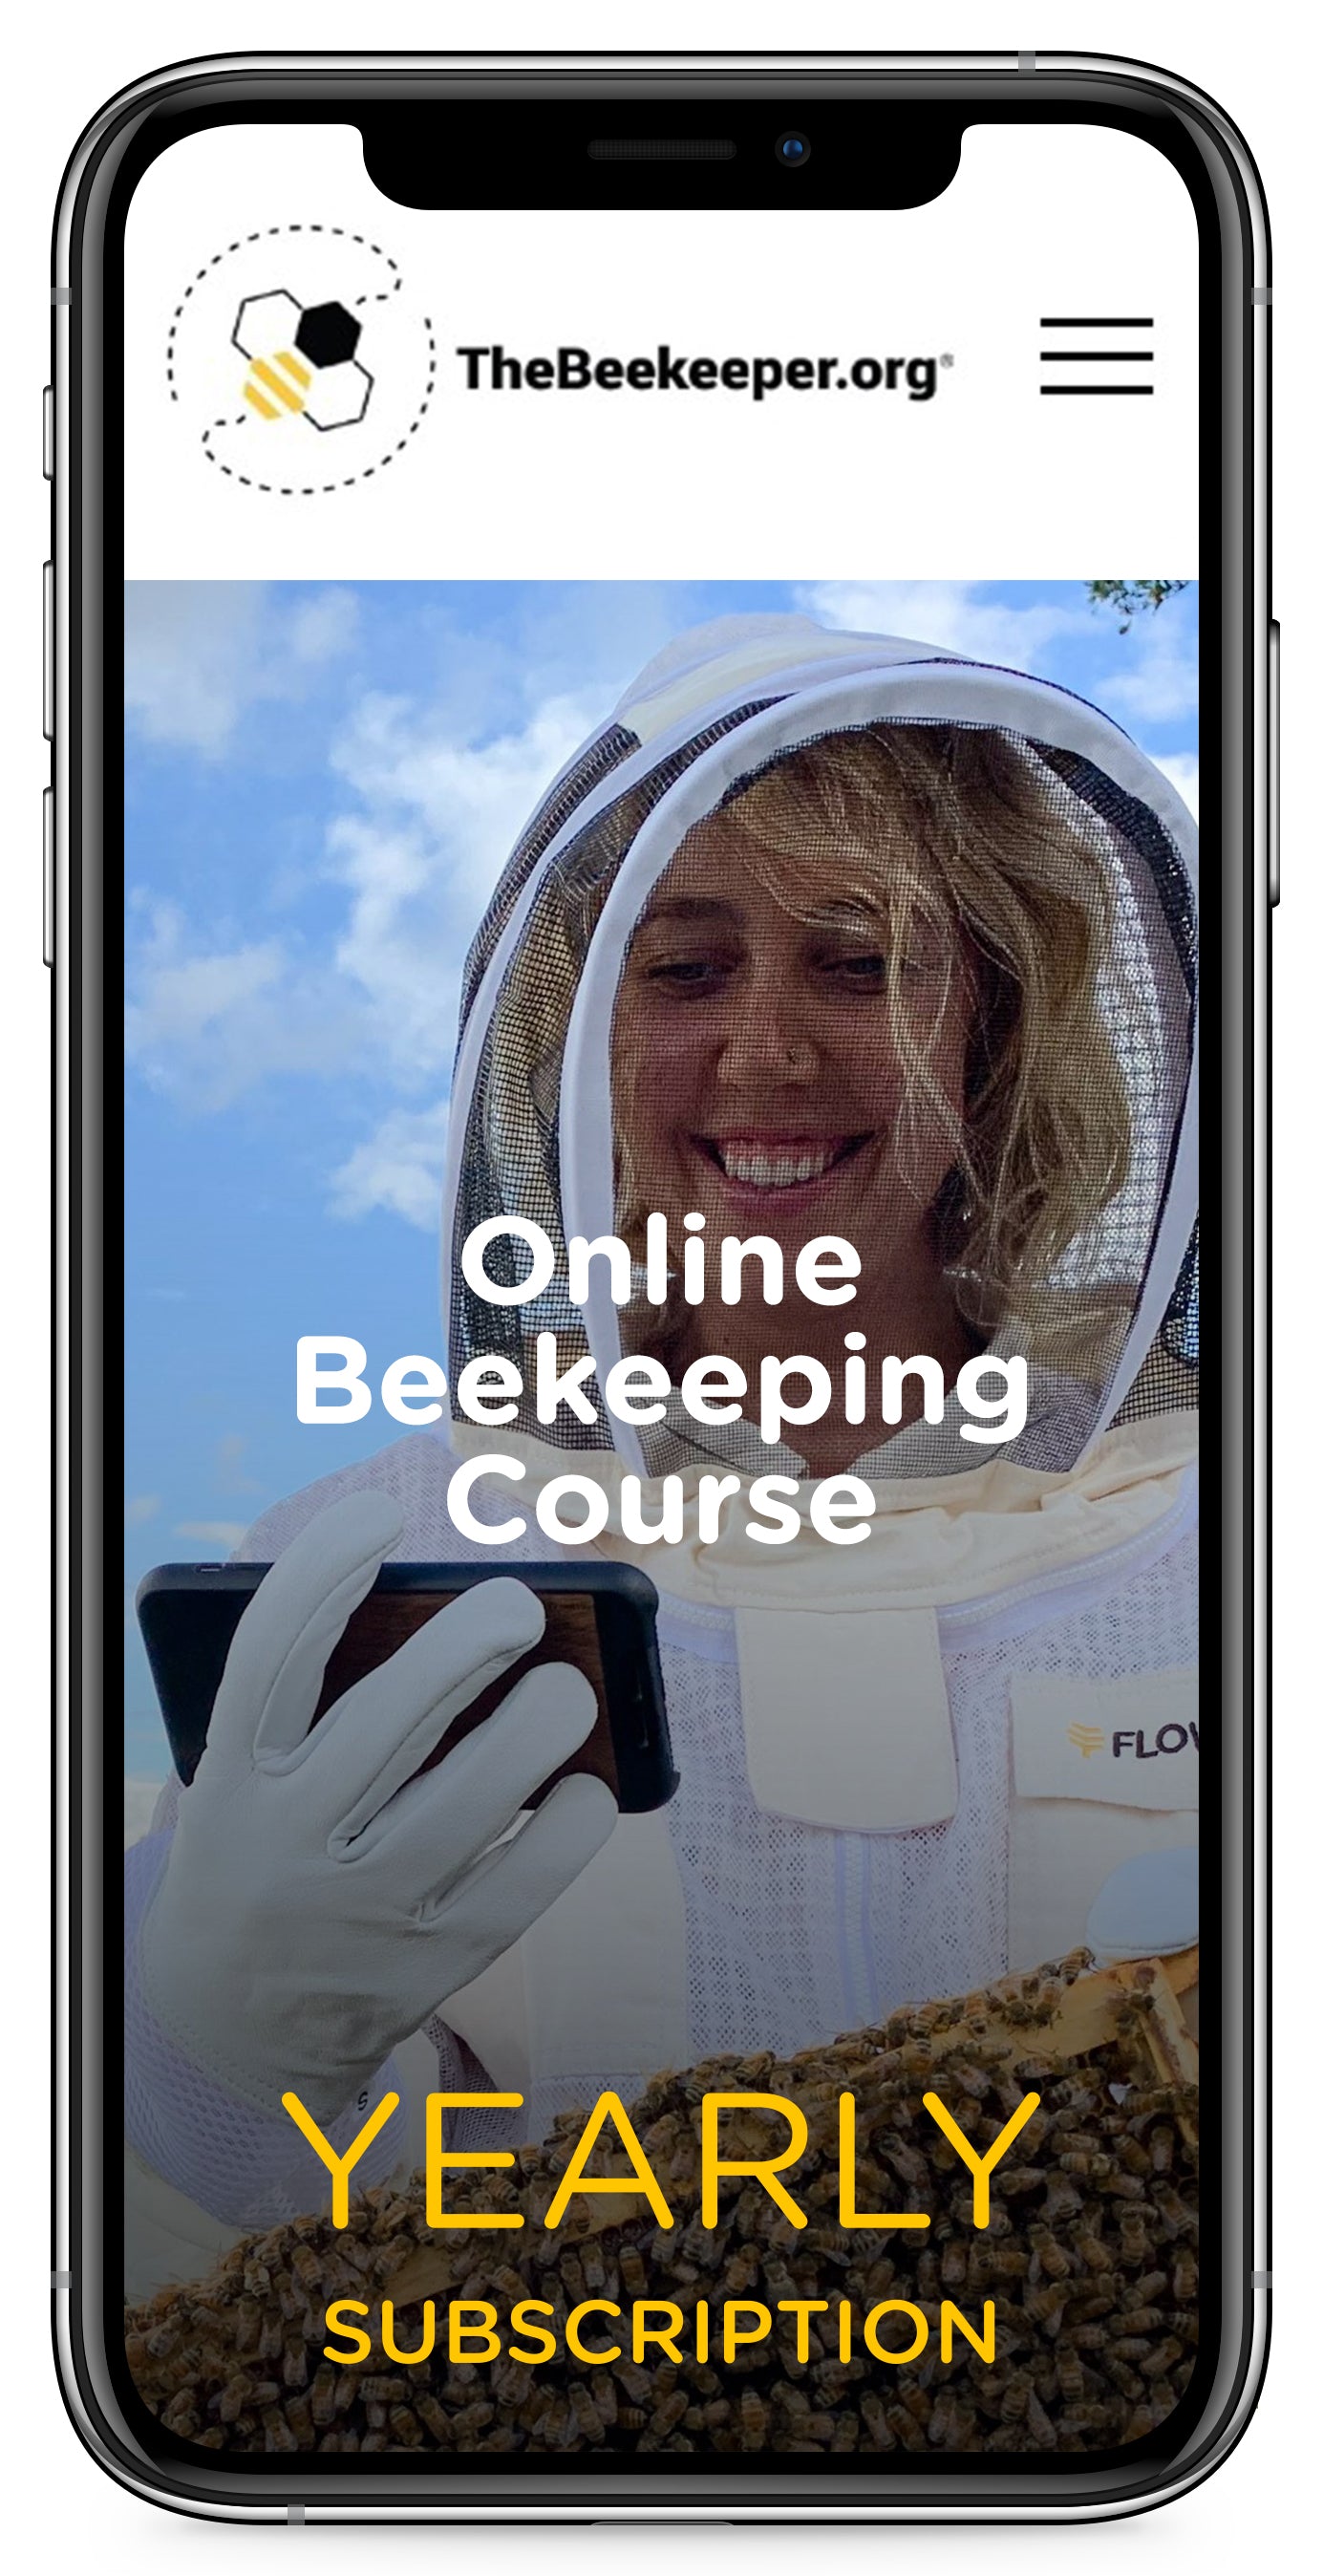 Online beekeeping course - yearly subscription